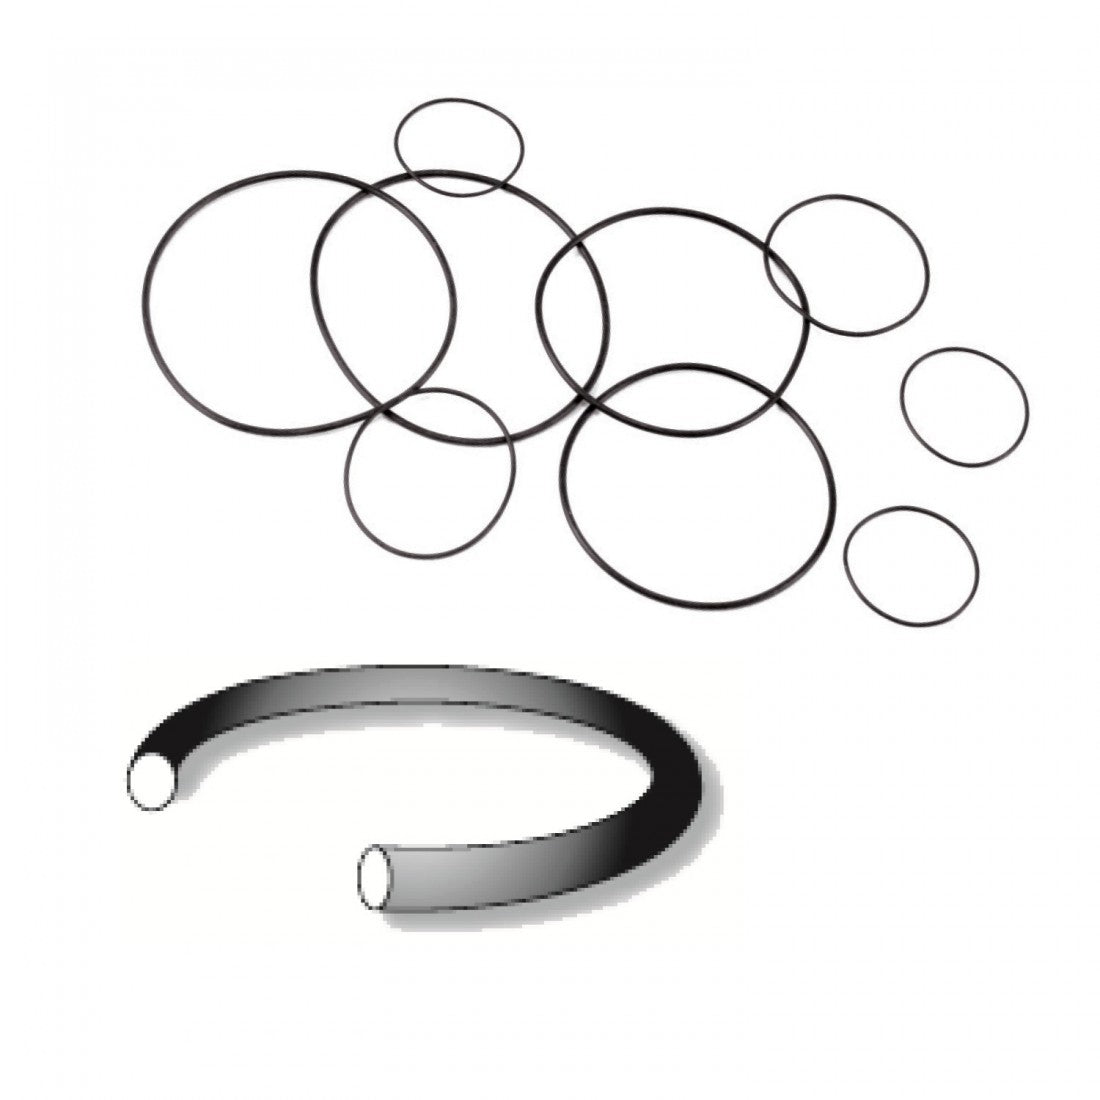 O-Ring Case Back Gaskets - Refills (Pack of 5)